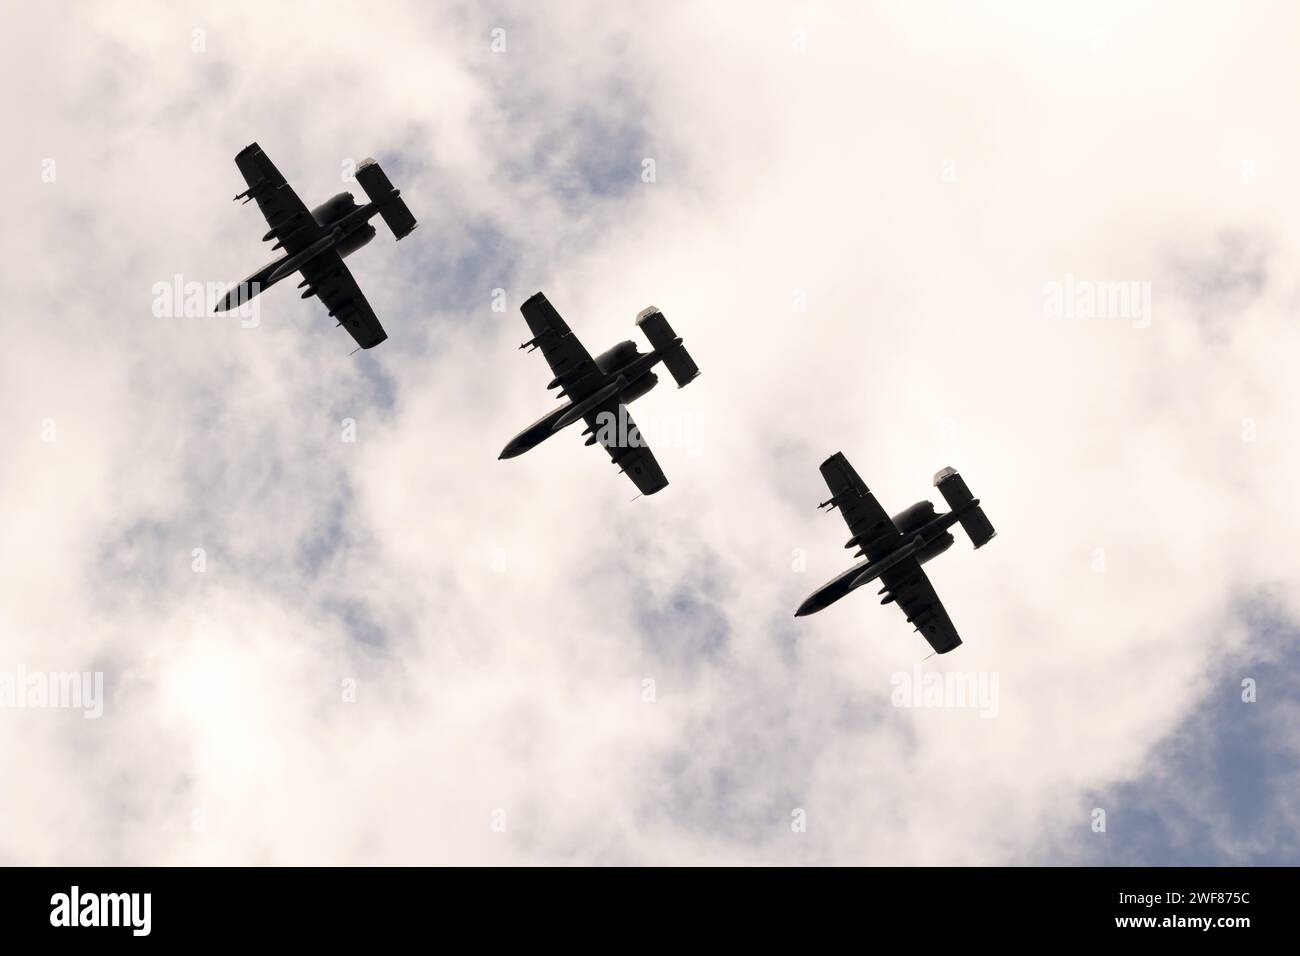 US Air Force A-10C Thunderbolt II attack aircraft in formation over Jagel Airbase for NATO exercise Air Defender 2023. Jagel, Germany - June 16, 2023 Stock Photo